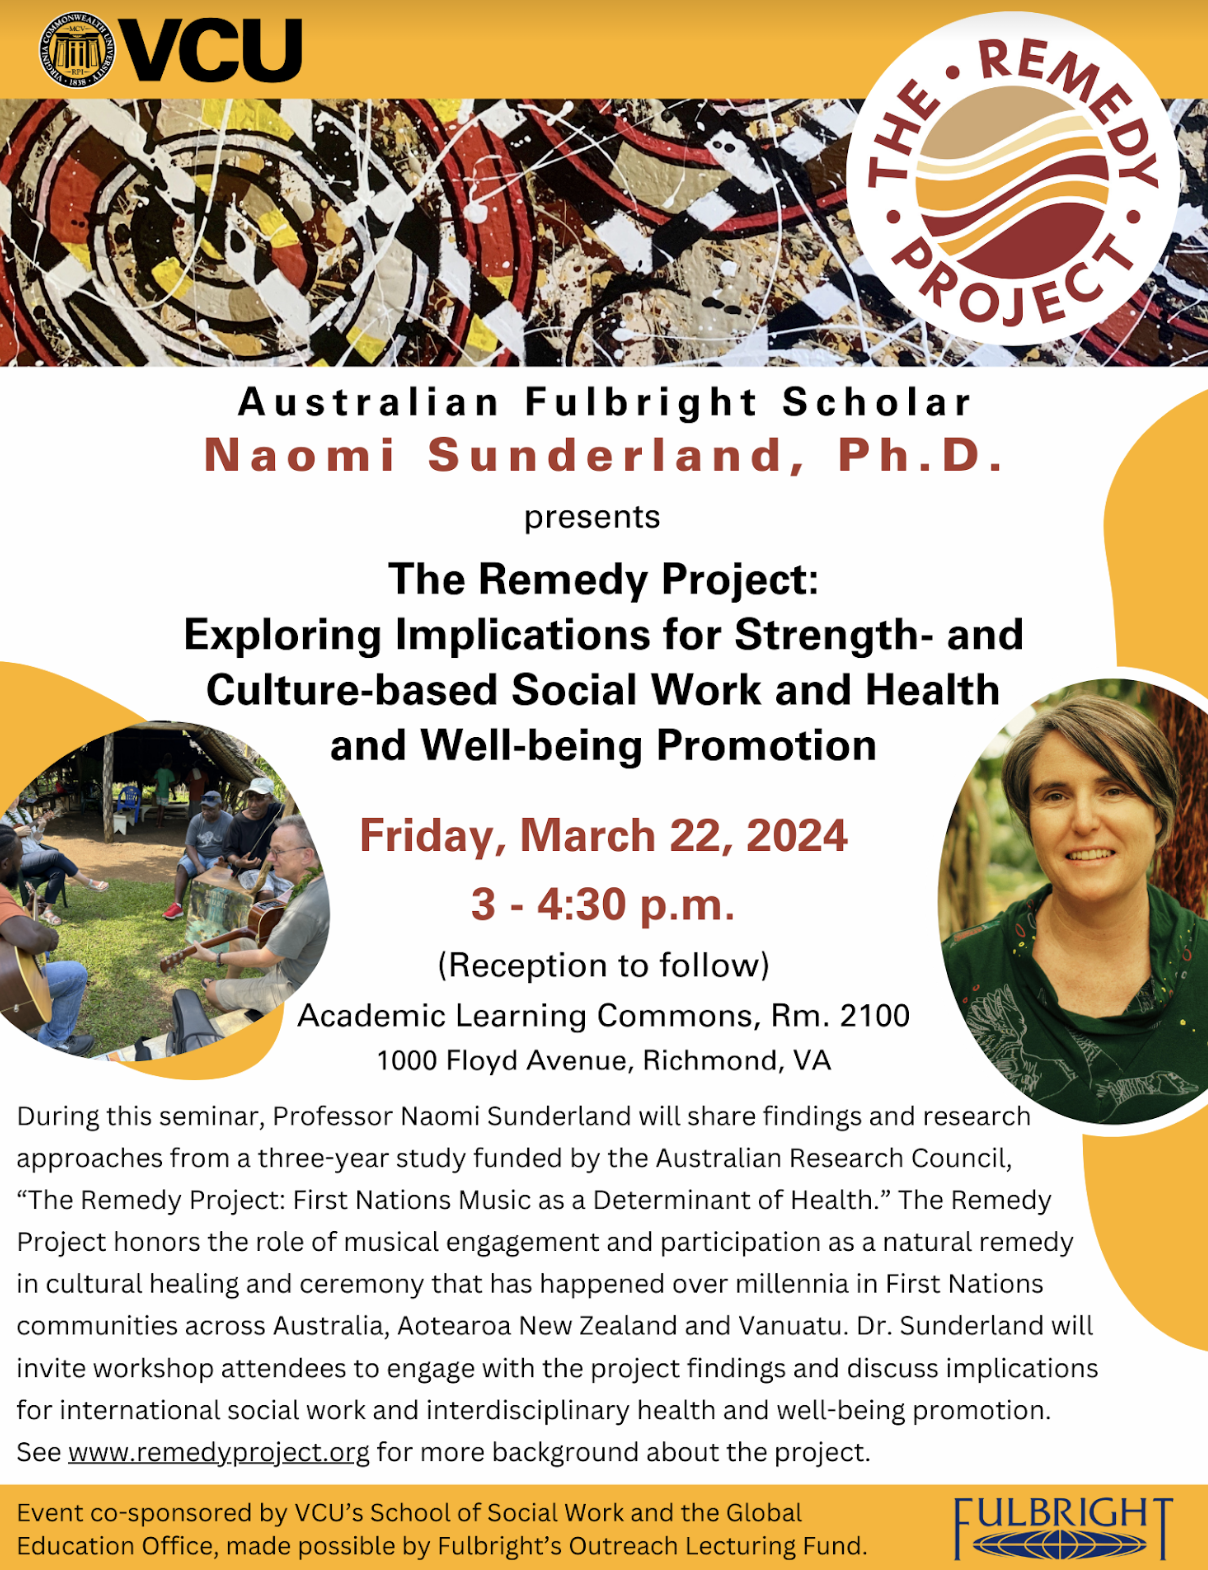 The Remedy Project presented by Australian Fulbright Scholar Naomi Sunderland PhD March 22, 2024